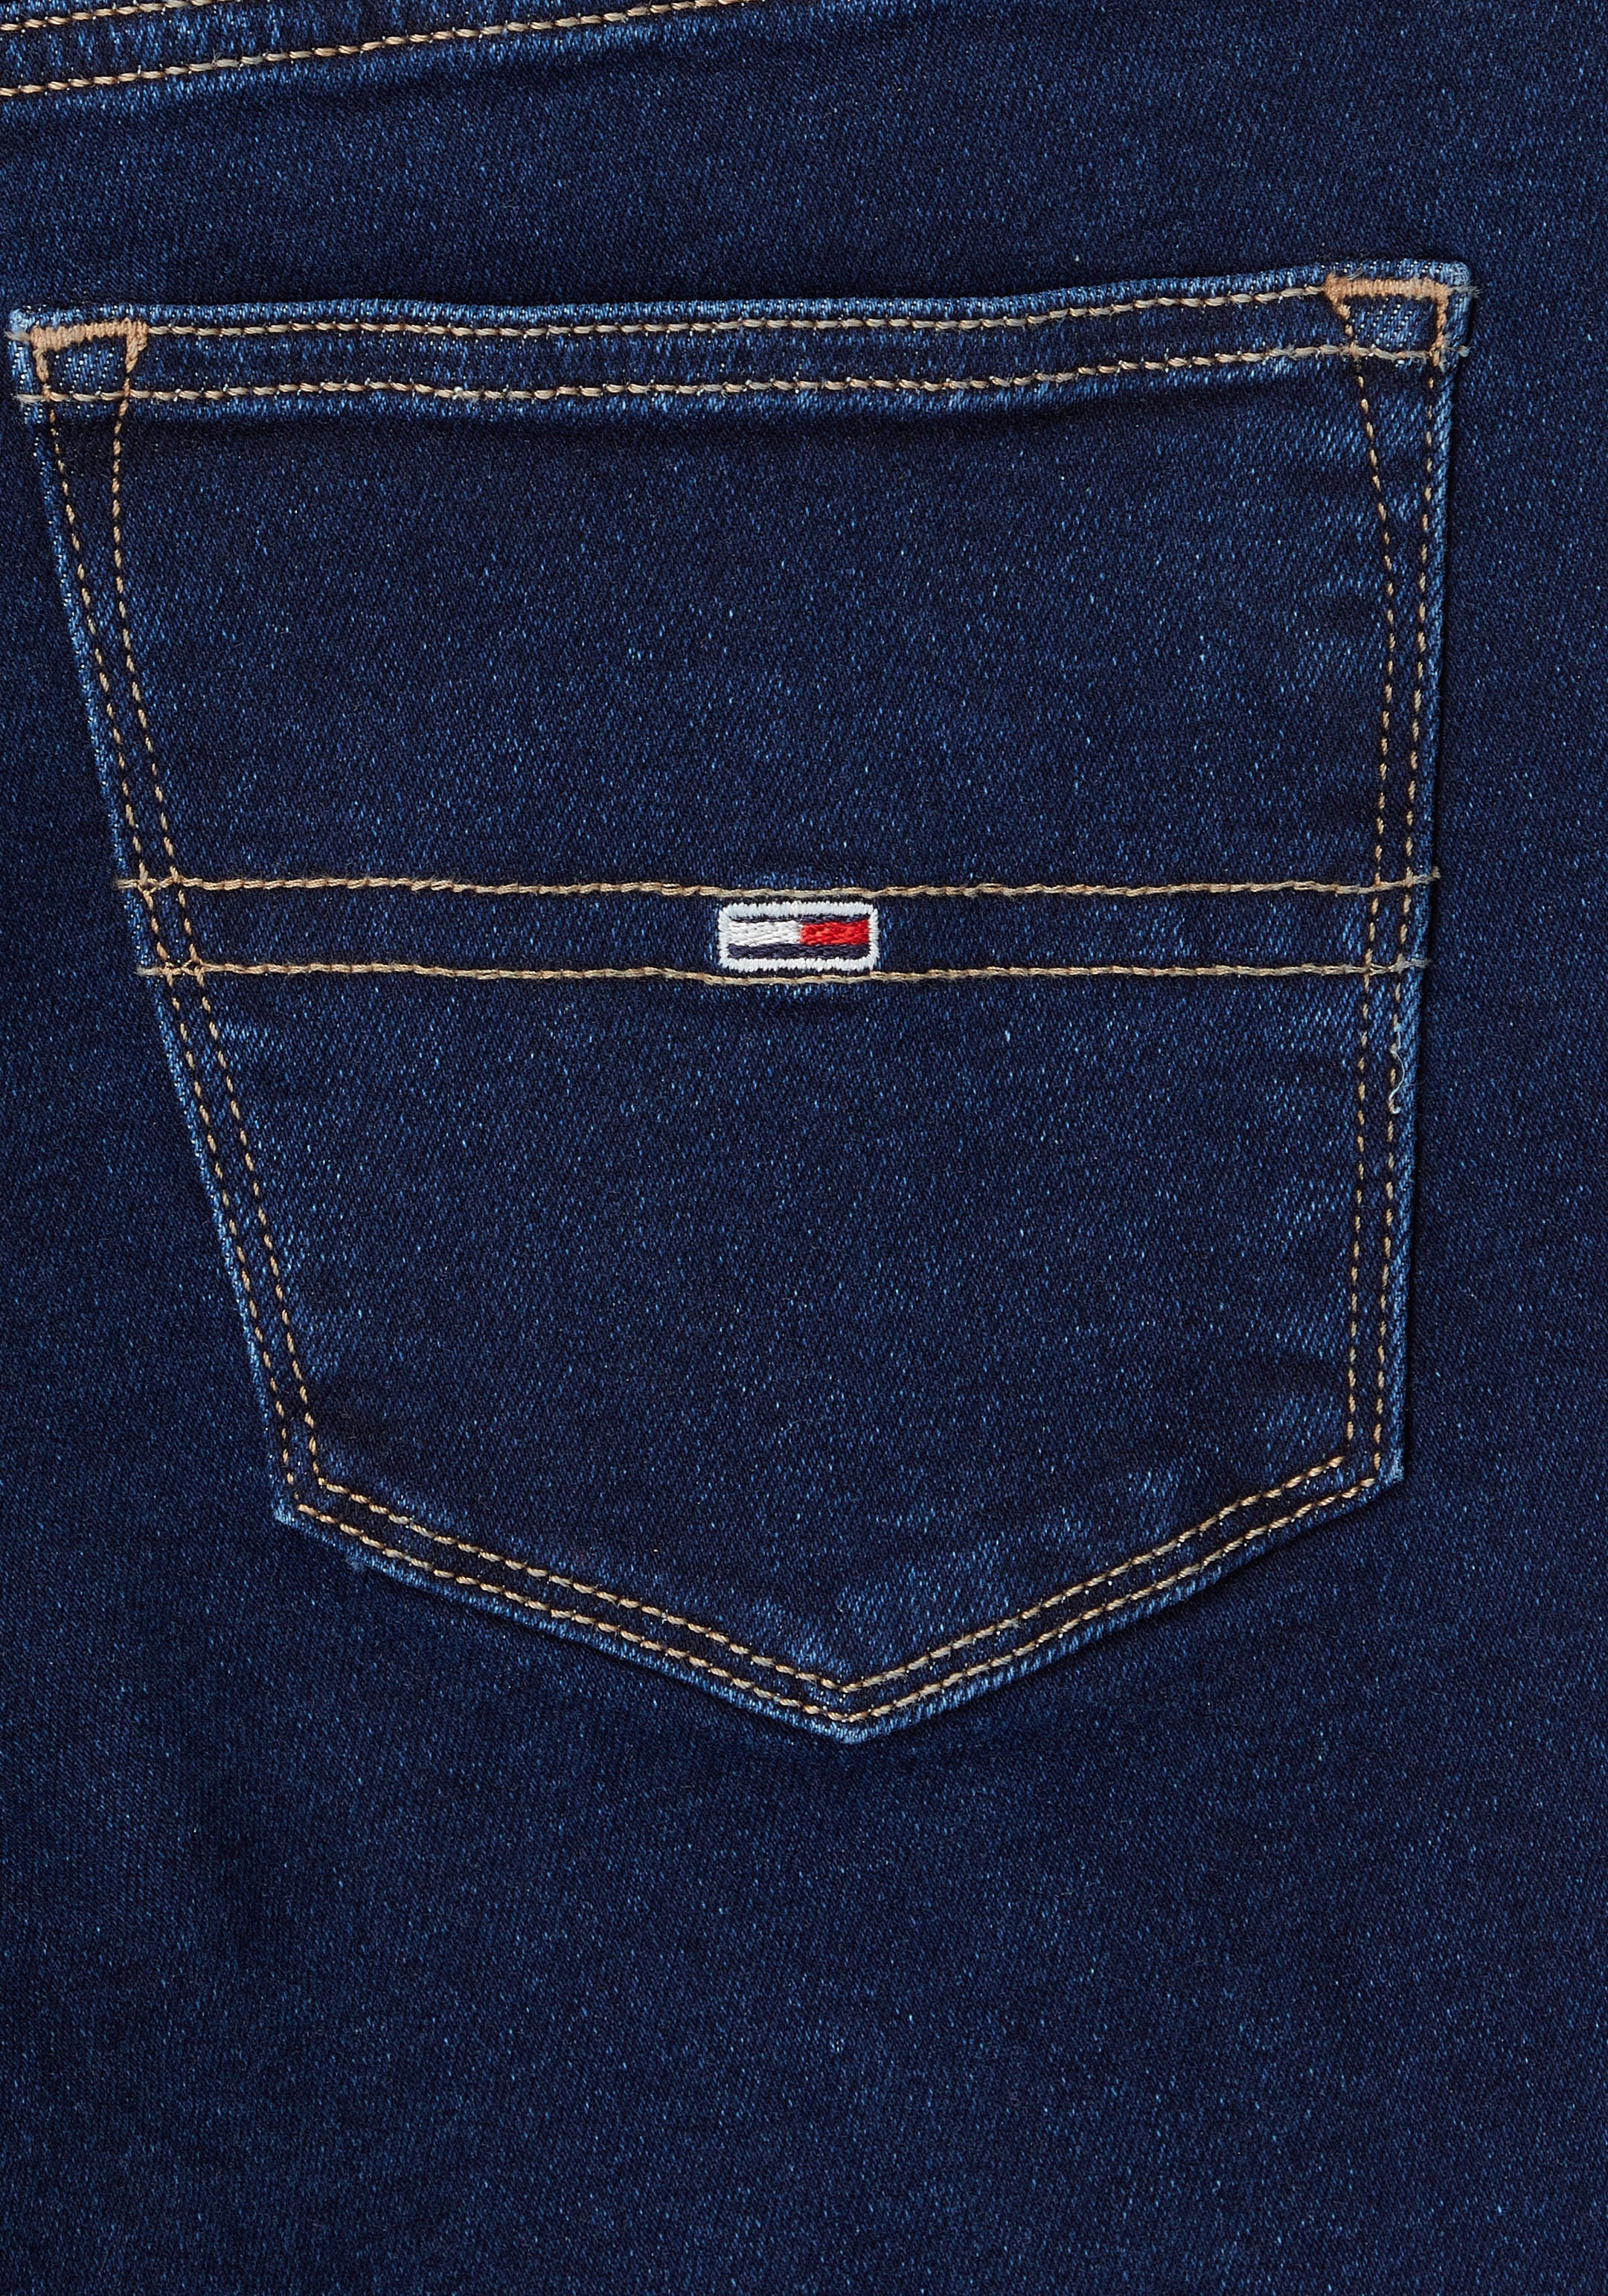 Tommy Jeans Skinny-fit-Jeans »Nora«, mit im Tommy Label-Badge Jeans Passe hinten Online & OTTO Shop